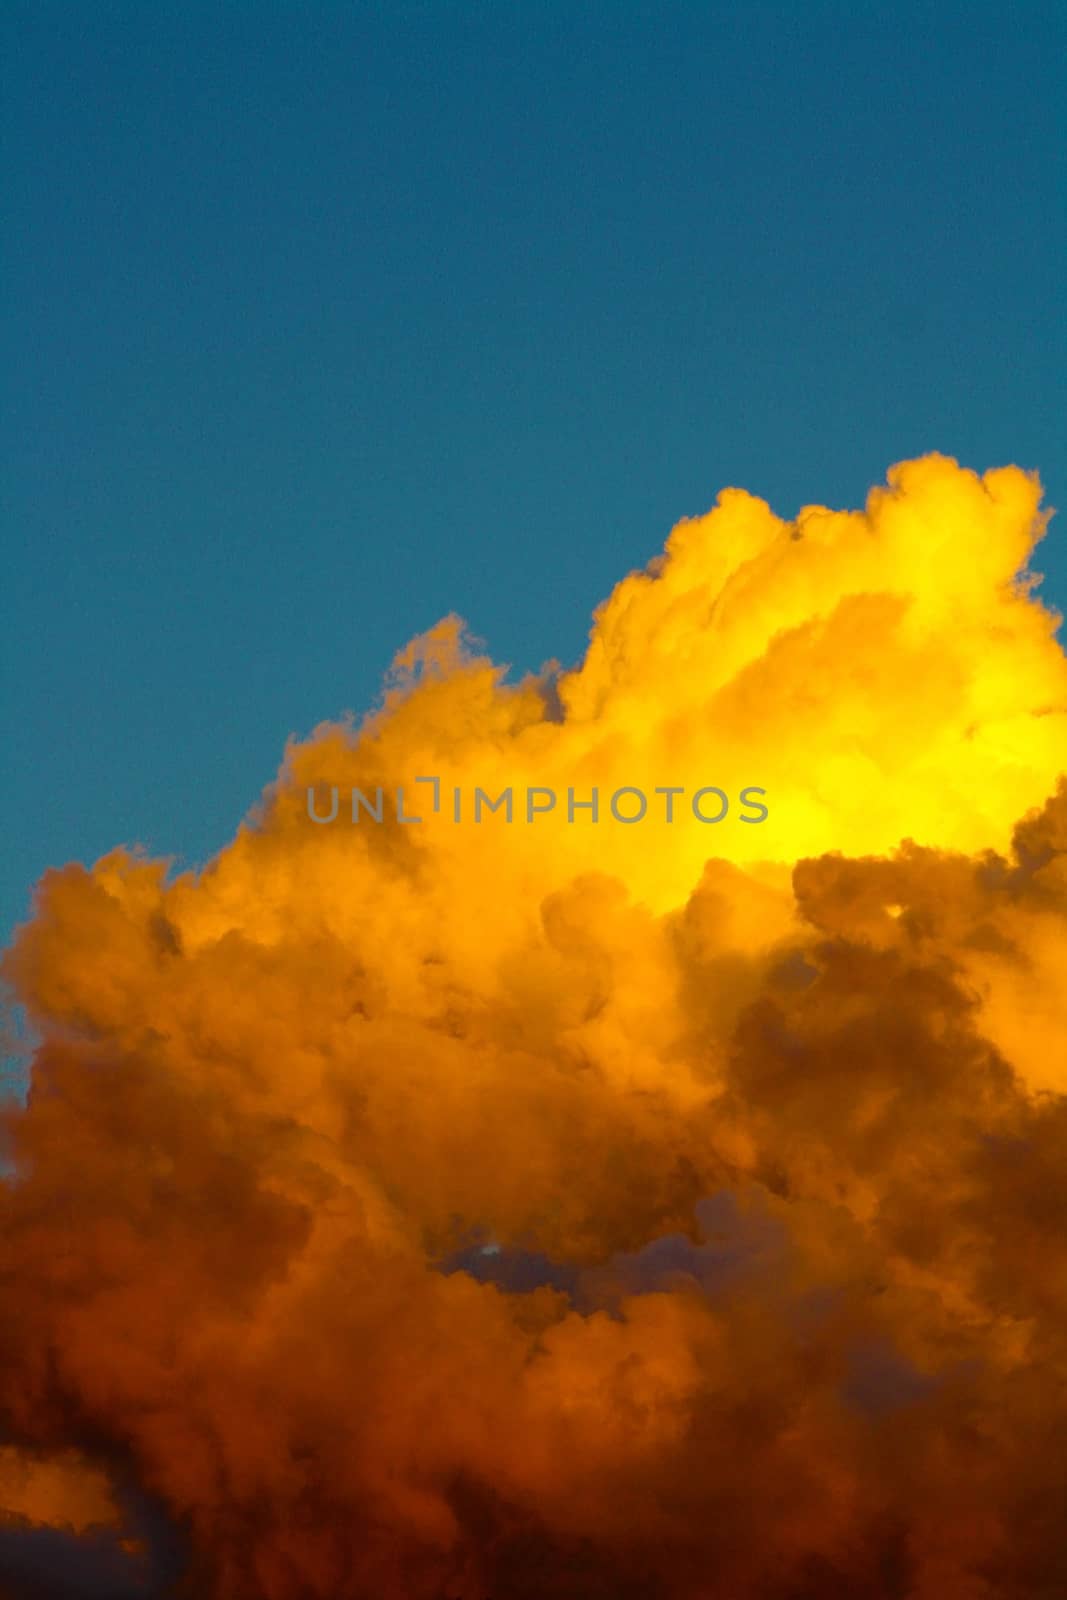 Golden clouds on blue background formatted as portrait